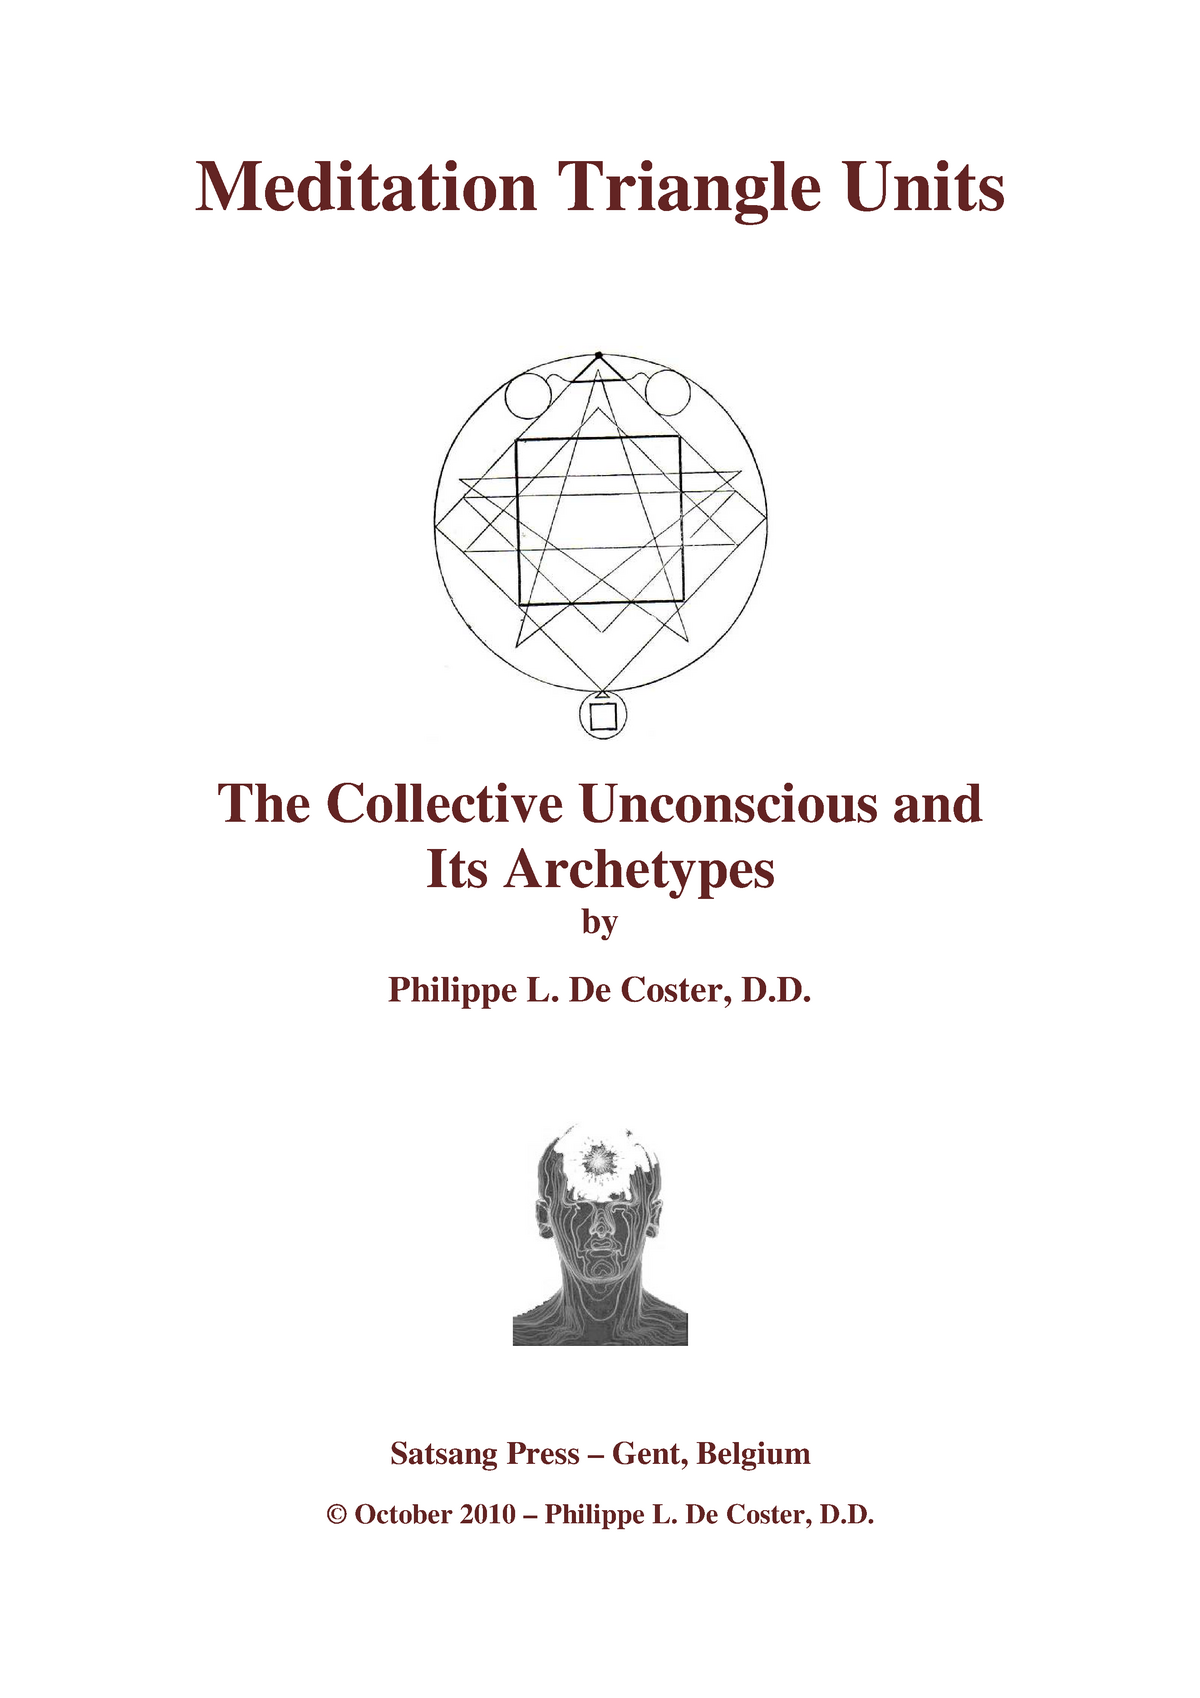 Carl Jung: Analyzing the Collective Unconscious and Self-Individuation —  Eightify